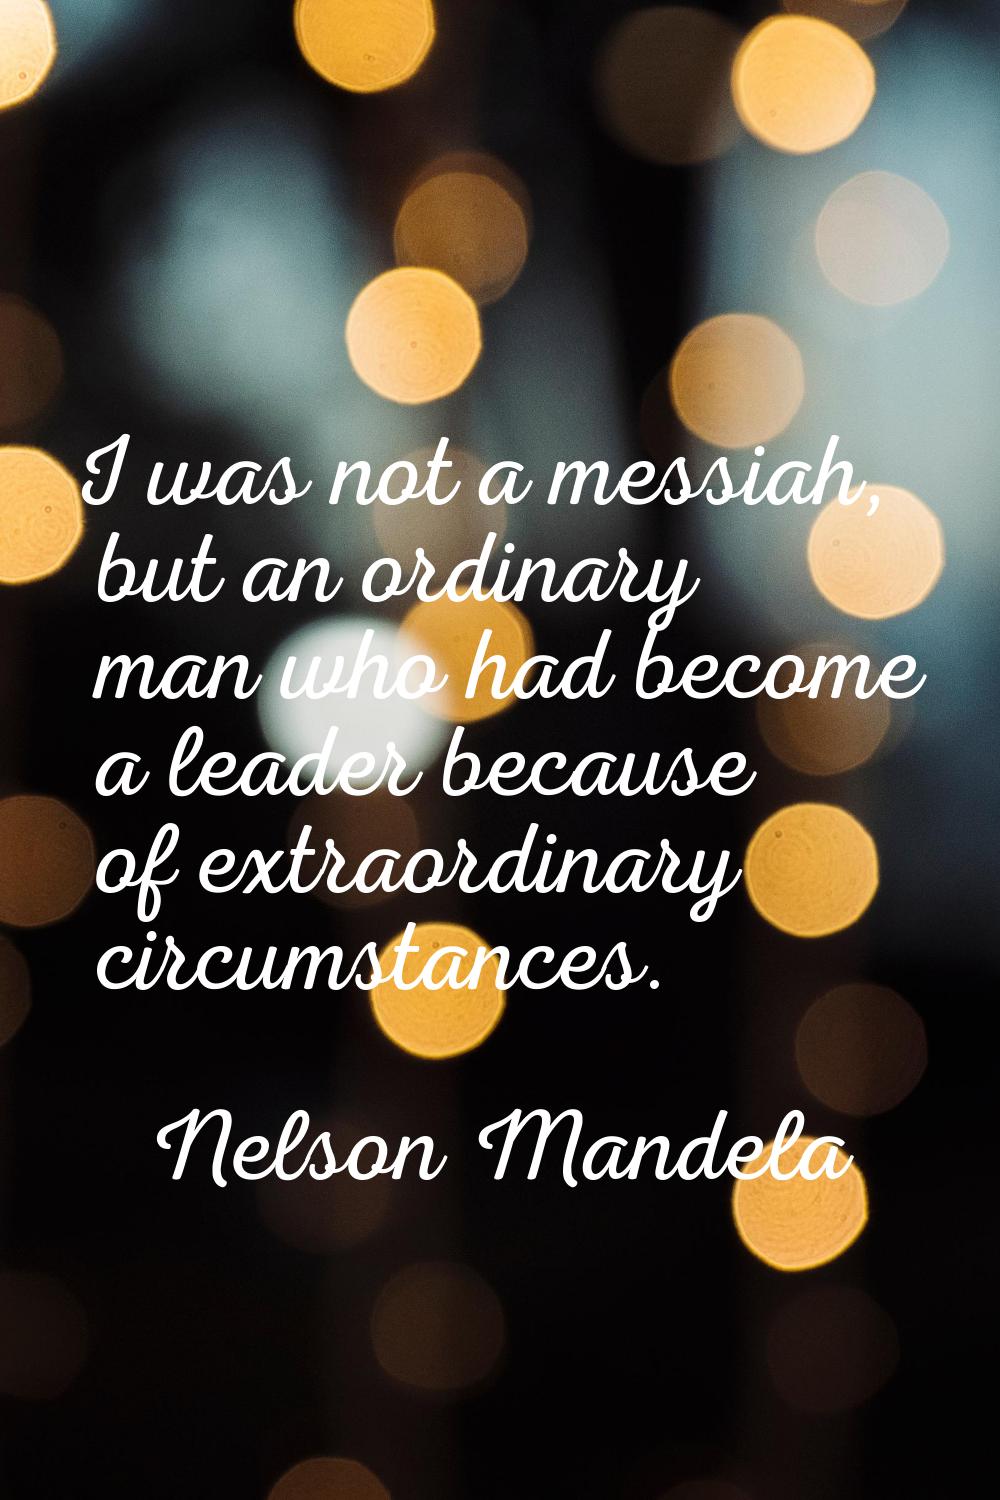 I was not a messiah, but an ordinary man who had become a leader because of extraordinary circumsta